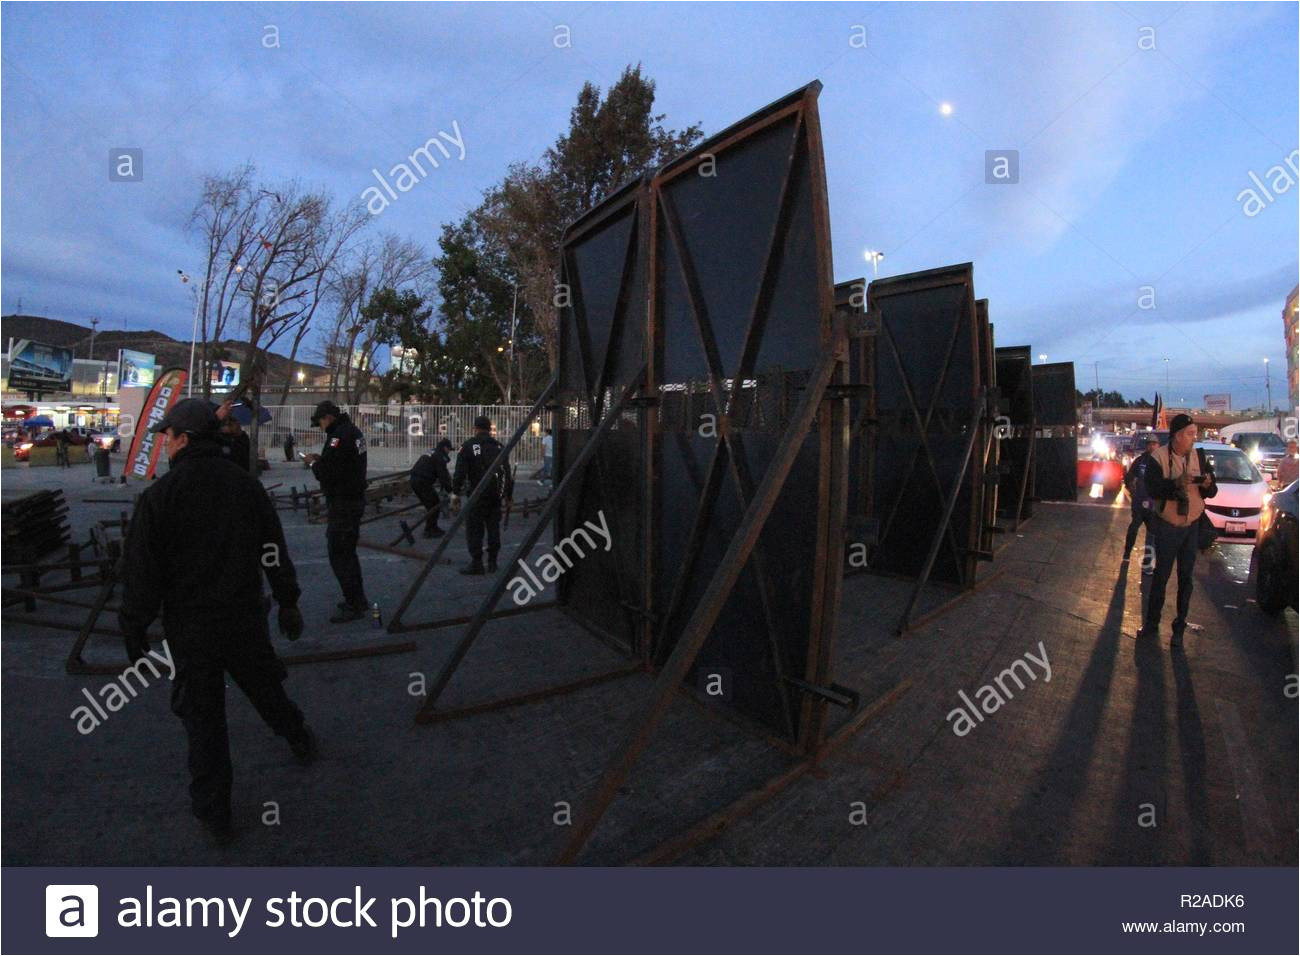 elements of the federal police install barricades in the city of tijuana in the state of baja california mexico on 17 november 2018 the federal police of mexico placed a barricade containment of metal on saturday at the international booth of san ysidro in tijuana border with the united states to contain the possible crossing of members of the migrant caravan through this route efejoebeth terriquez r2adk6 jpg